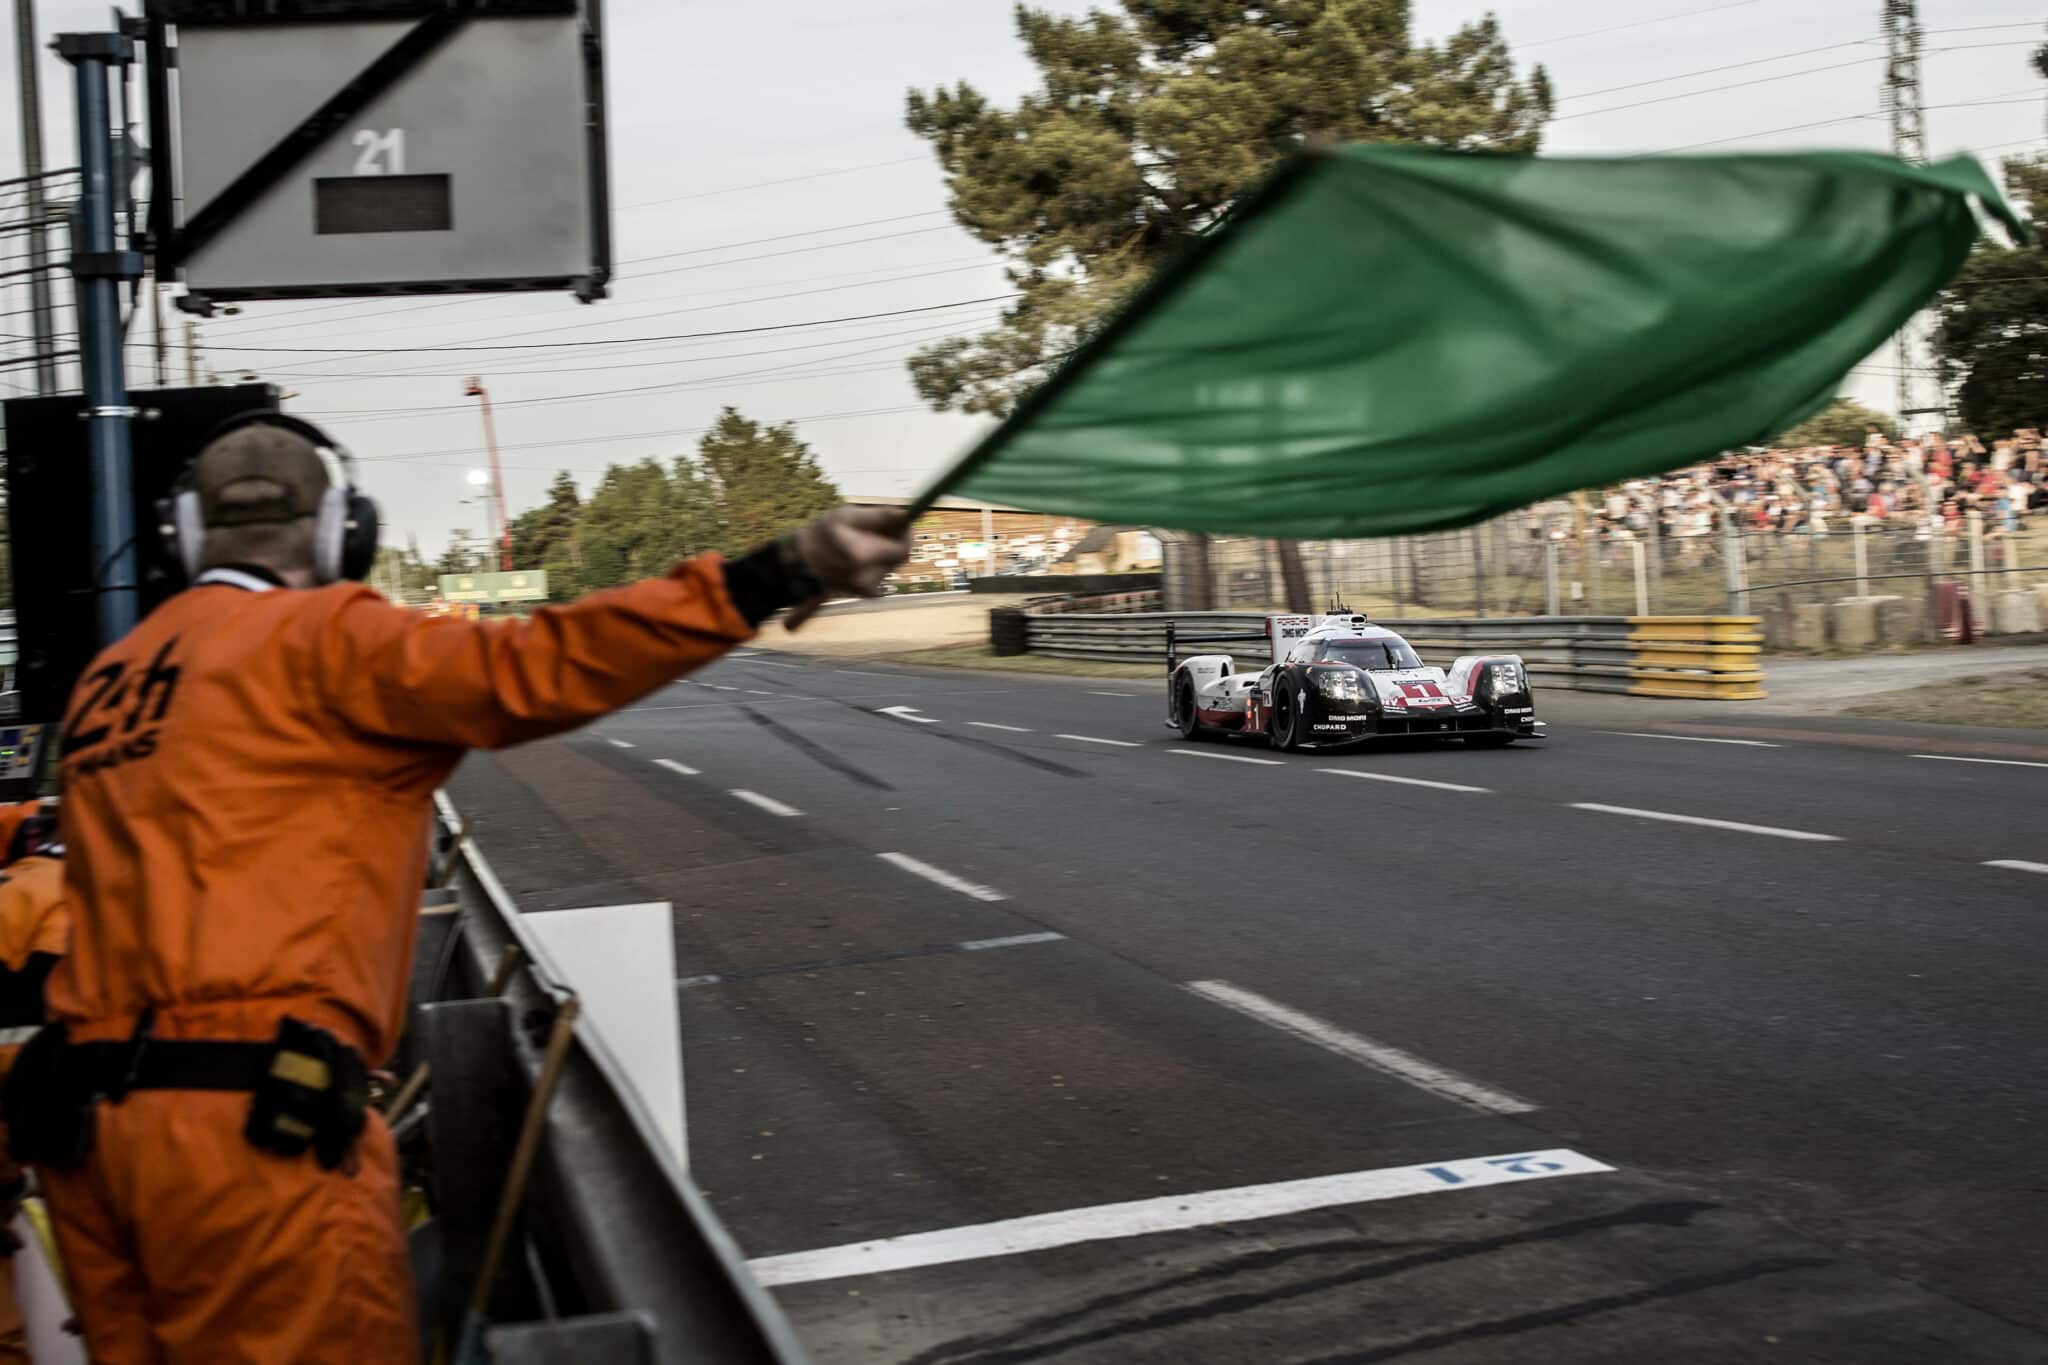 - Green Flag in F1 Racing: A Signal for Drivers to Resume Racing.